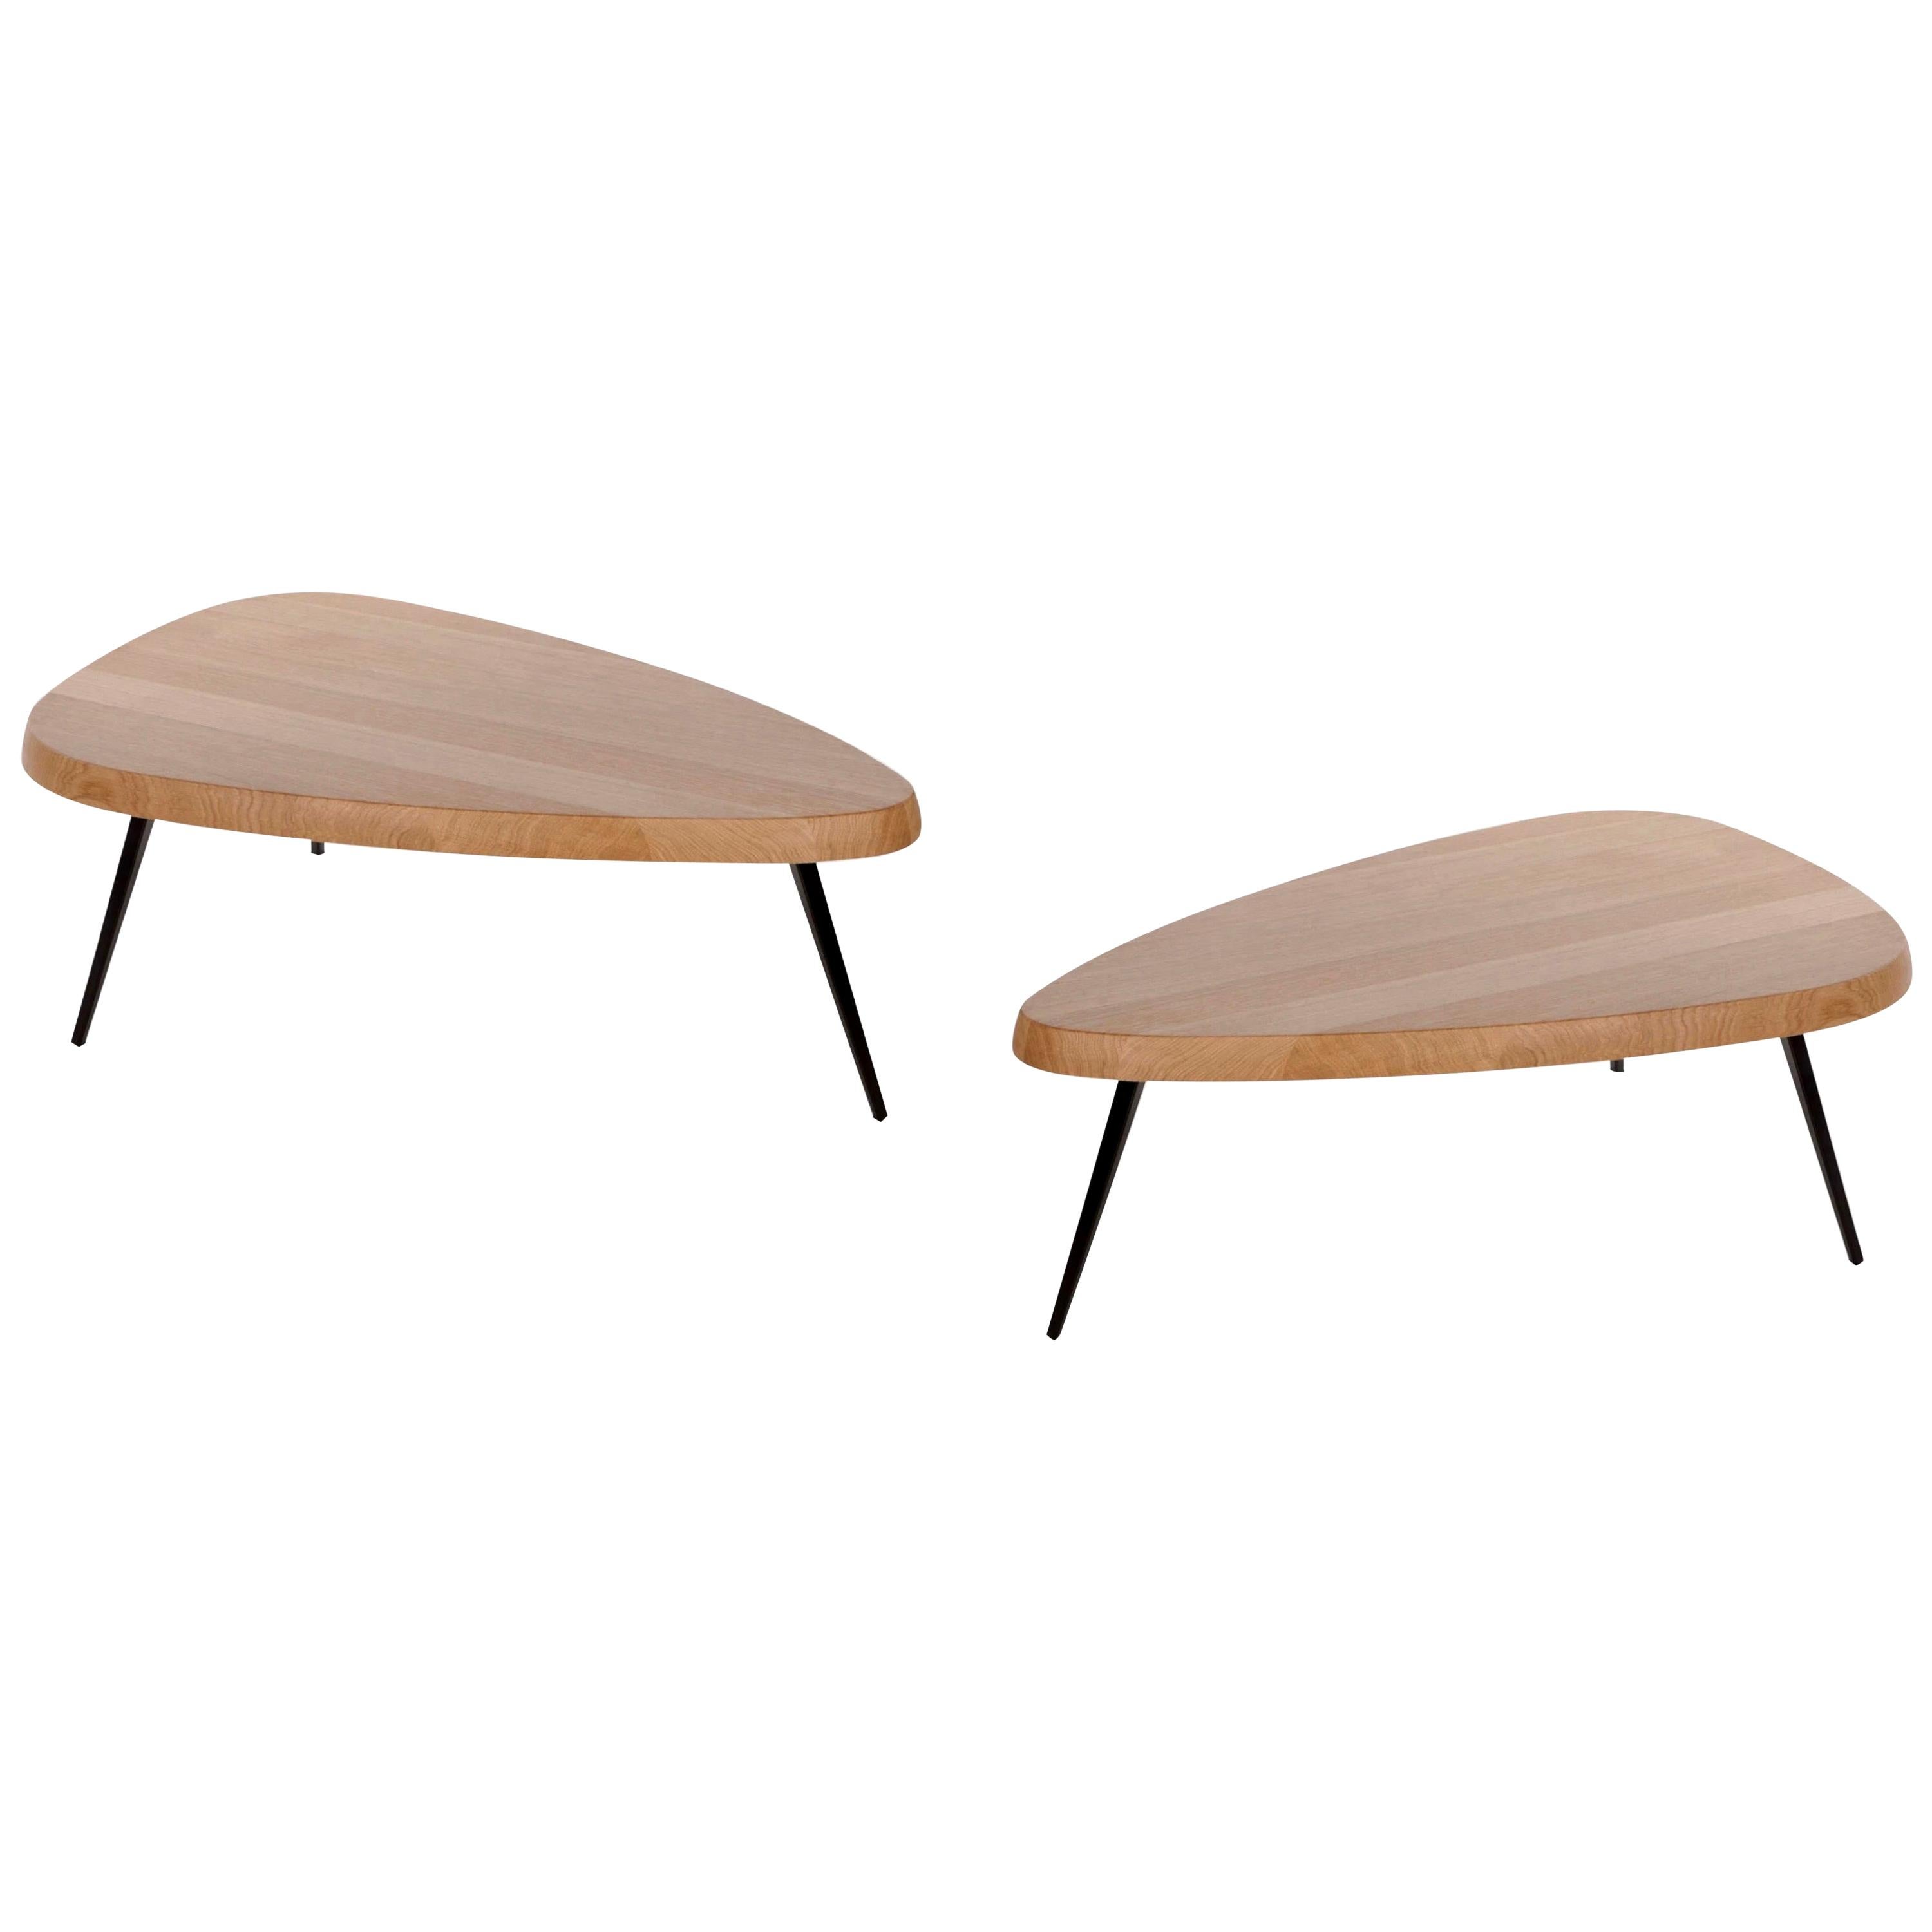 Charlotte Perriand Mexique Oak Low Tables, Cassina Maestri Collection, 2018